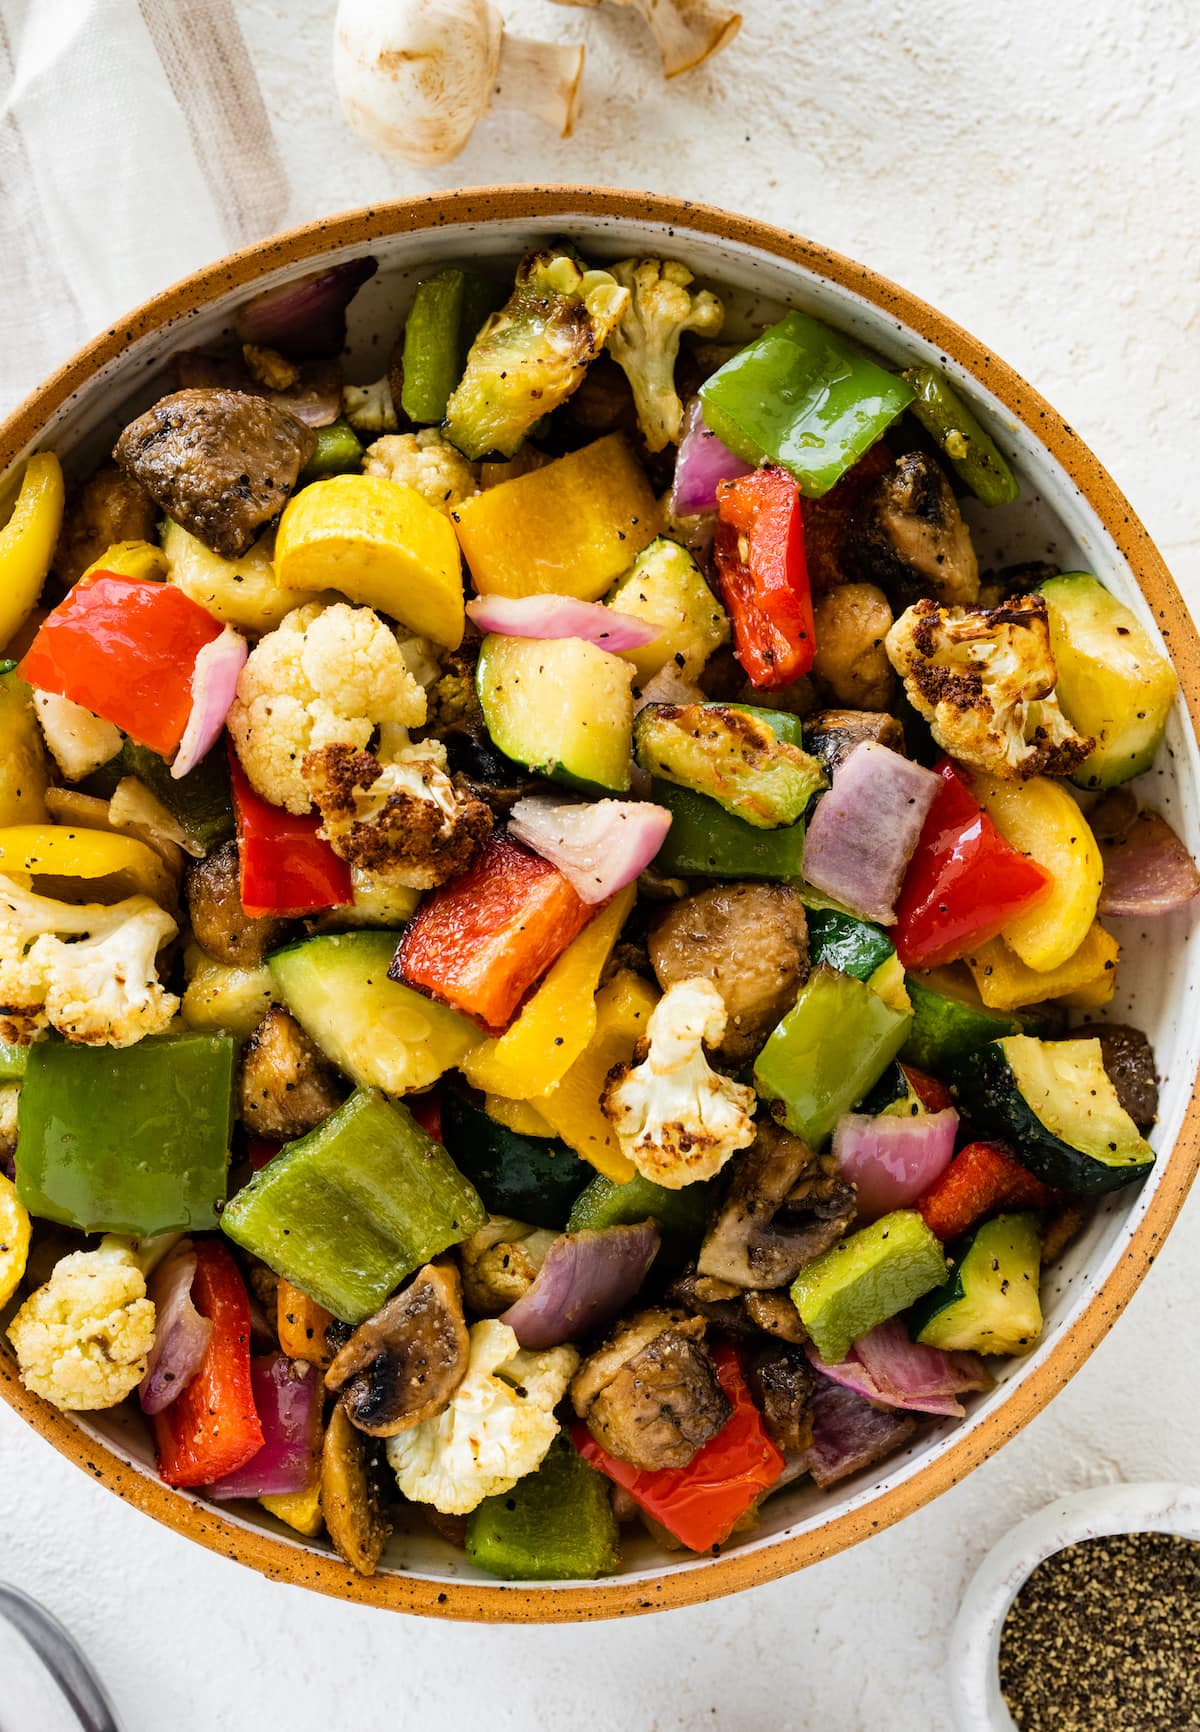 Air-fried vegetables in a bowl. Vegetables include cauliflower, mushroom, onion, zucchini, and bell peppers.